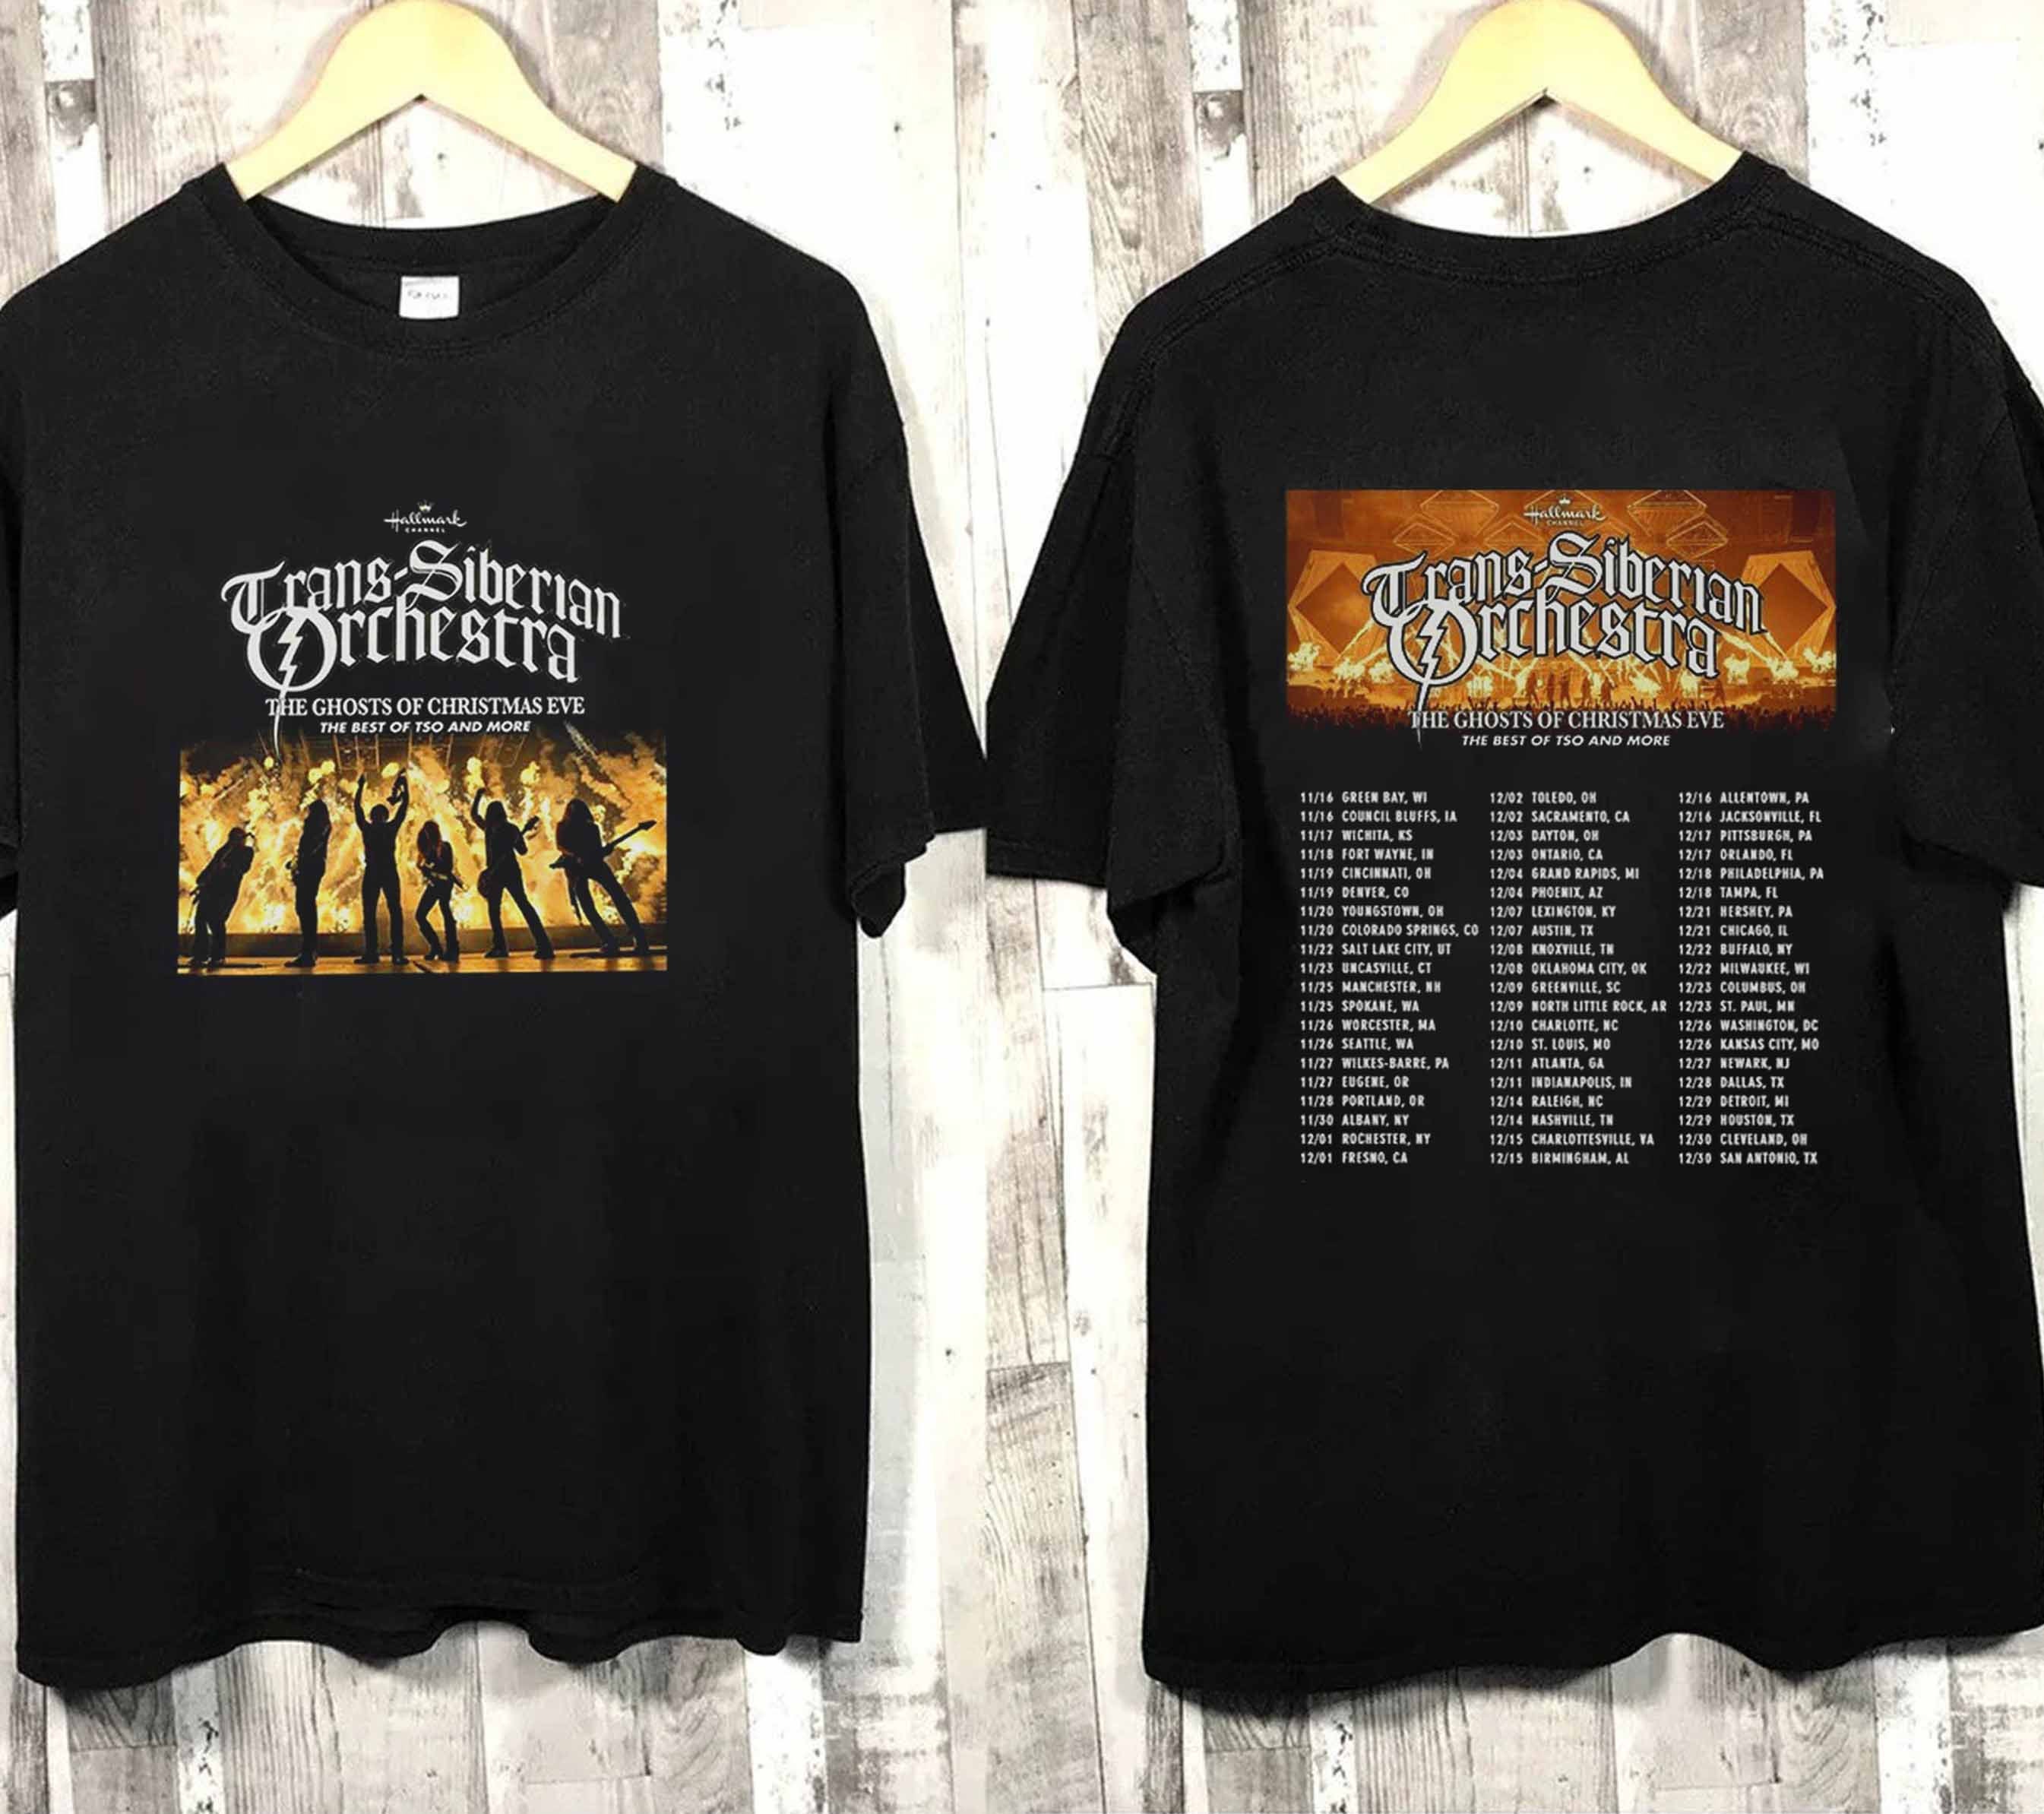 Discover Trans-Siberian Orchestra The Ghost Of Christmas Eve Winter Tour shirt